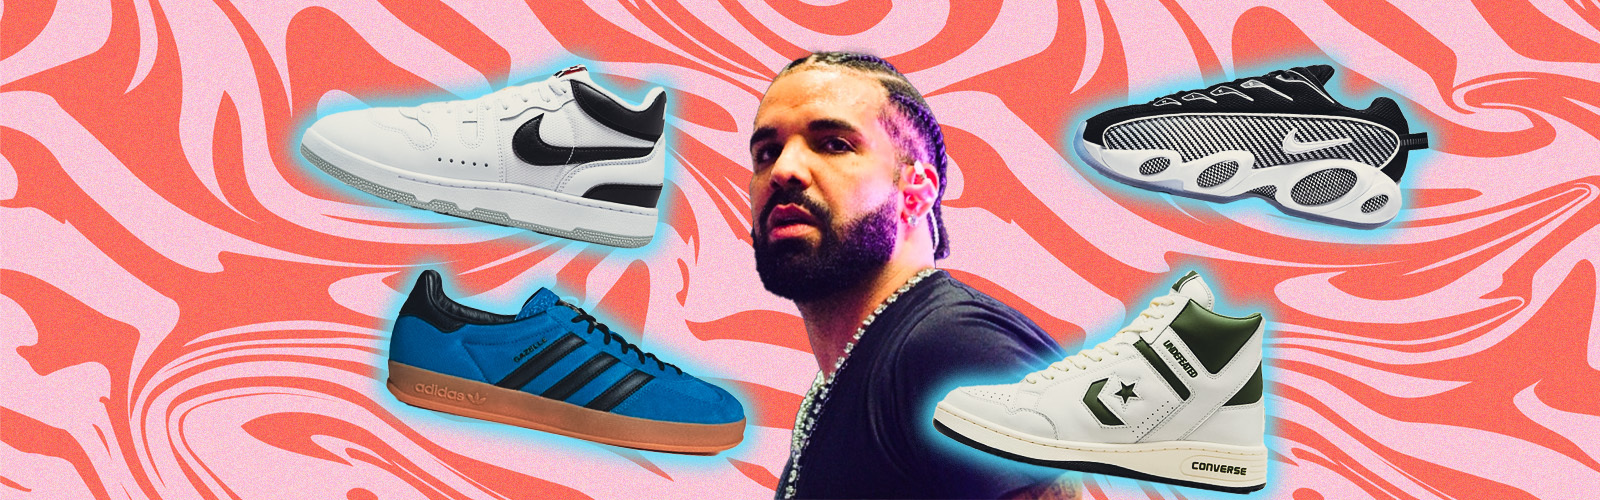 Drake's NOCTA Glide shoe is about to drop—here are the best social media  reactions